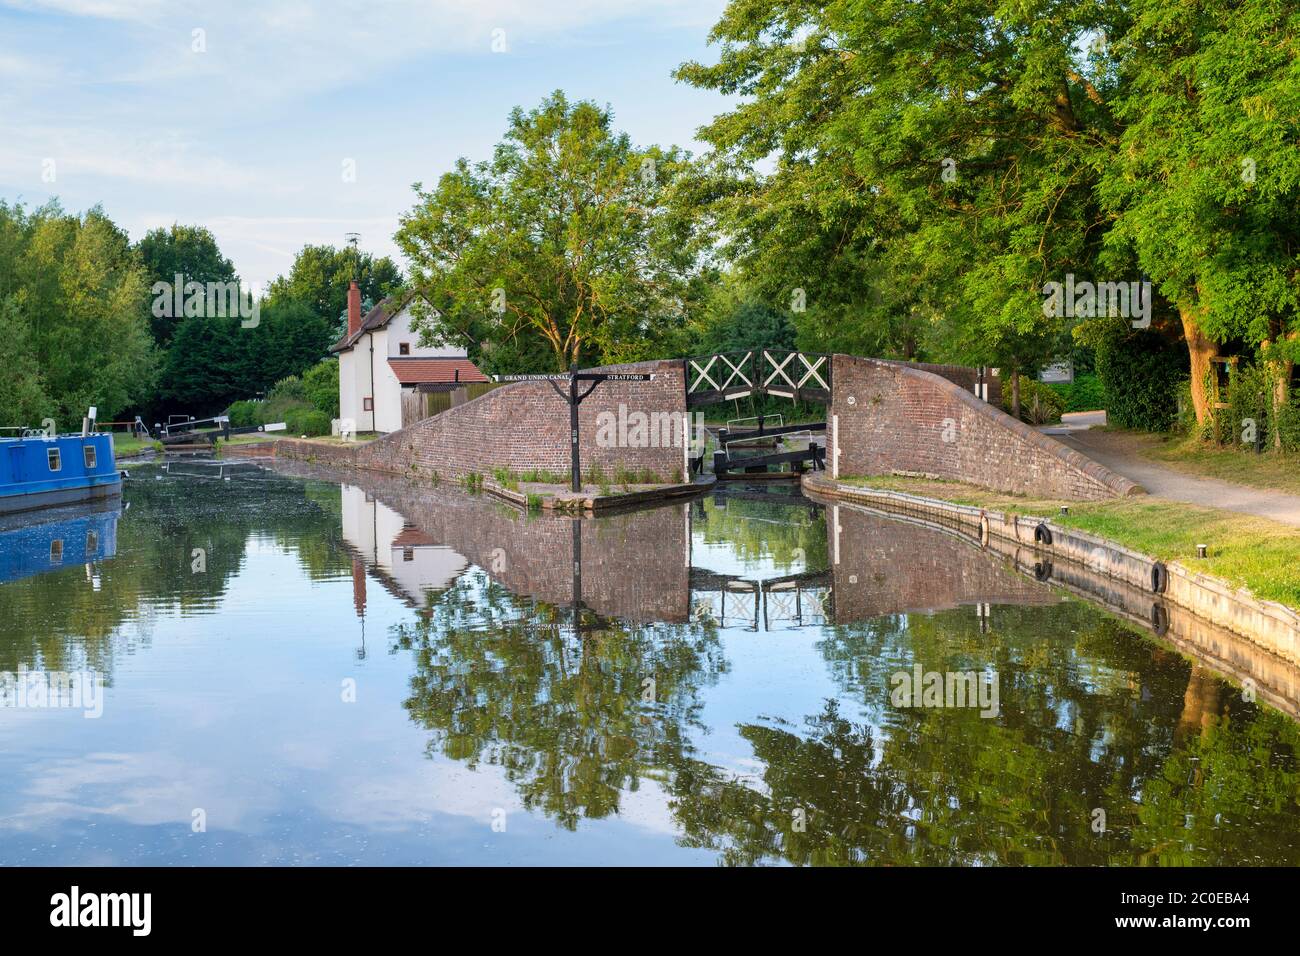 Kingswood Canal Junction, dove il canale Stratford-upon-Avon incontra il Grand Union Canal a Lapworth, Warwickshire, Inghilterra Foto Stock